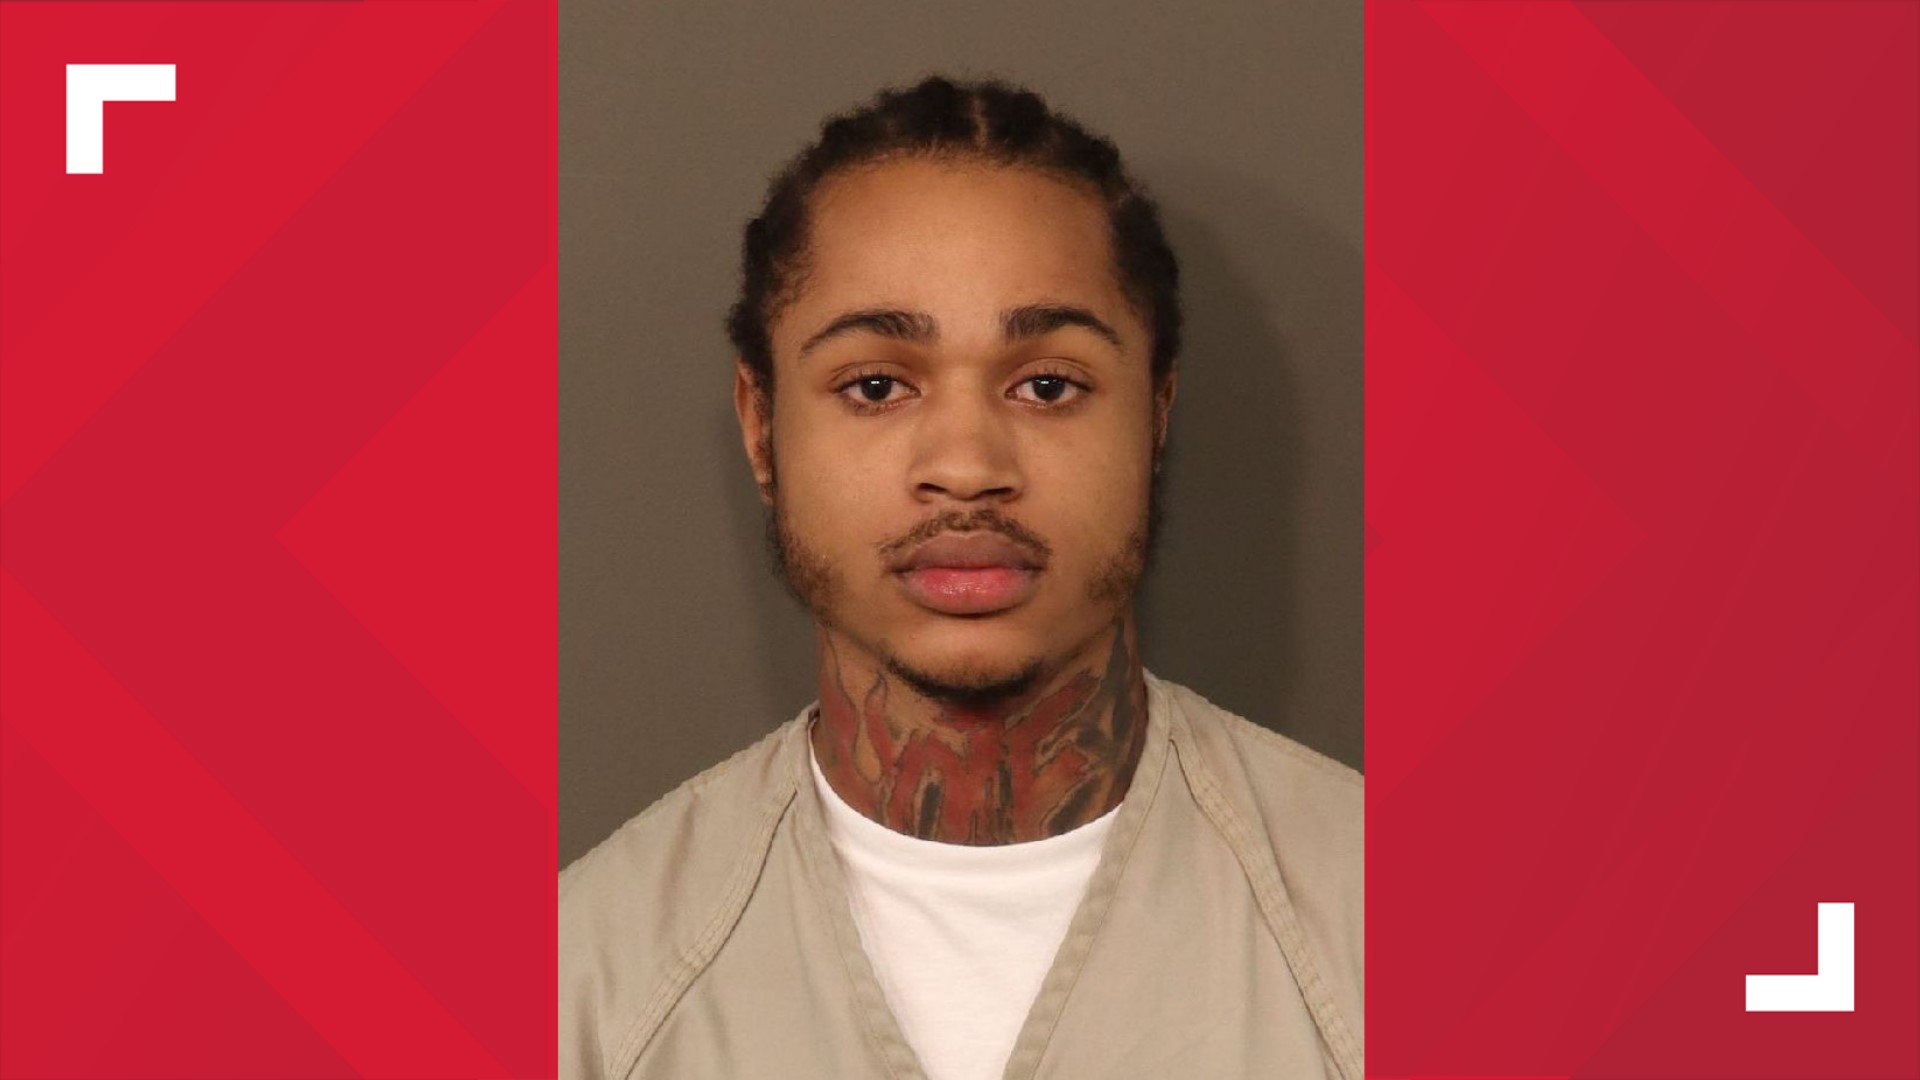 Kewai Hunter was taken into custody on Thursday and is being held at the Franklin County Correction Center.